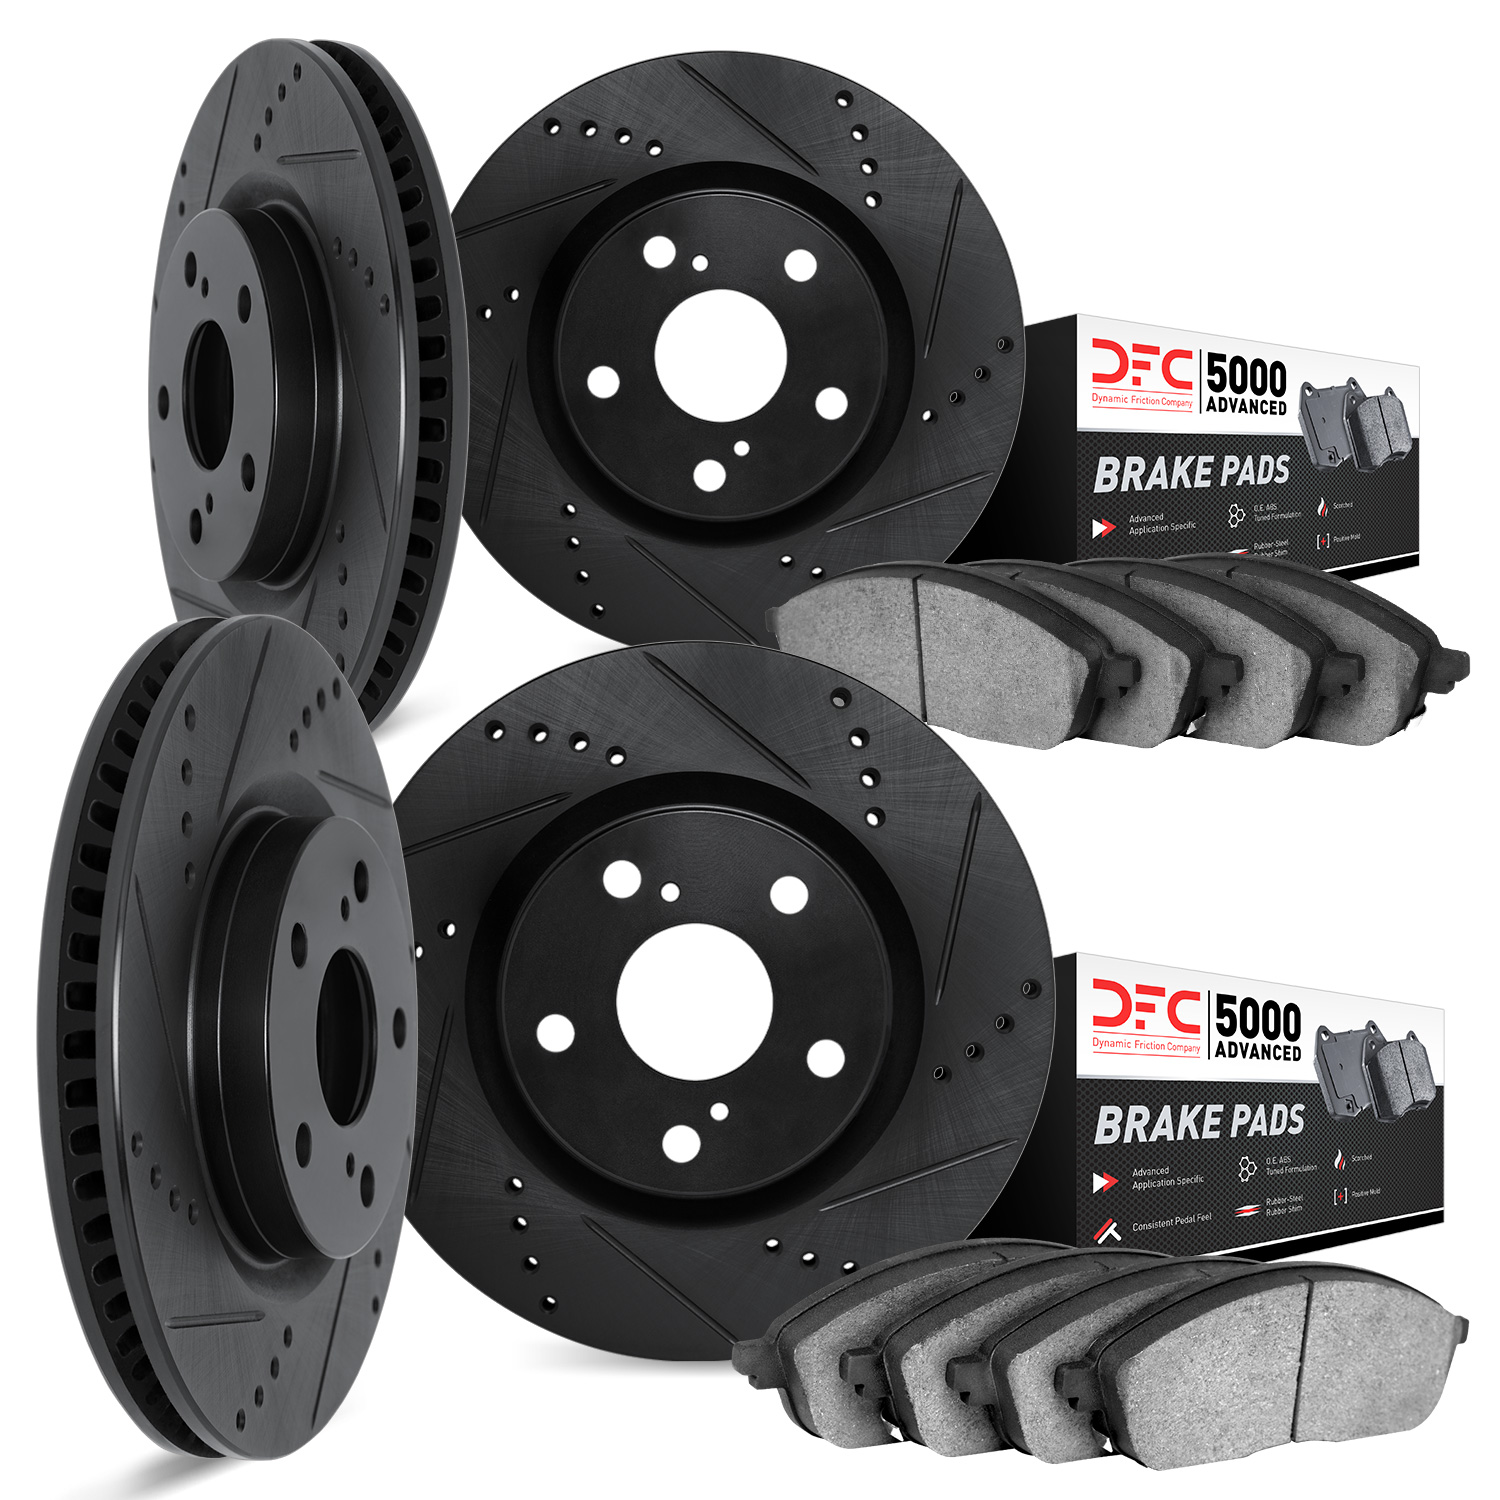 8504-42053 Drilled/Slotted Brake Rotors w/5000 Advanced Brake Pads Kit [Black], Fits Select Mopar, Position: Front and Rear